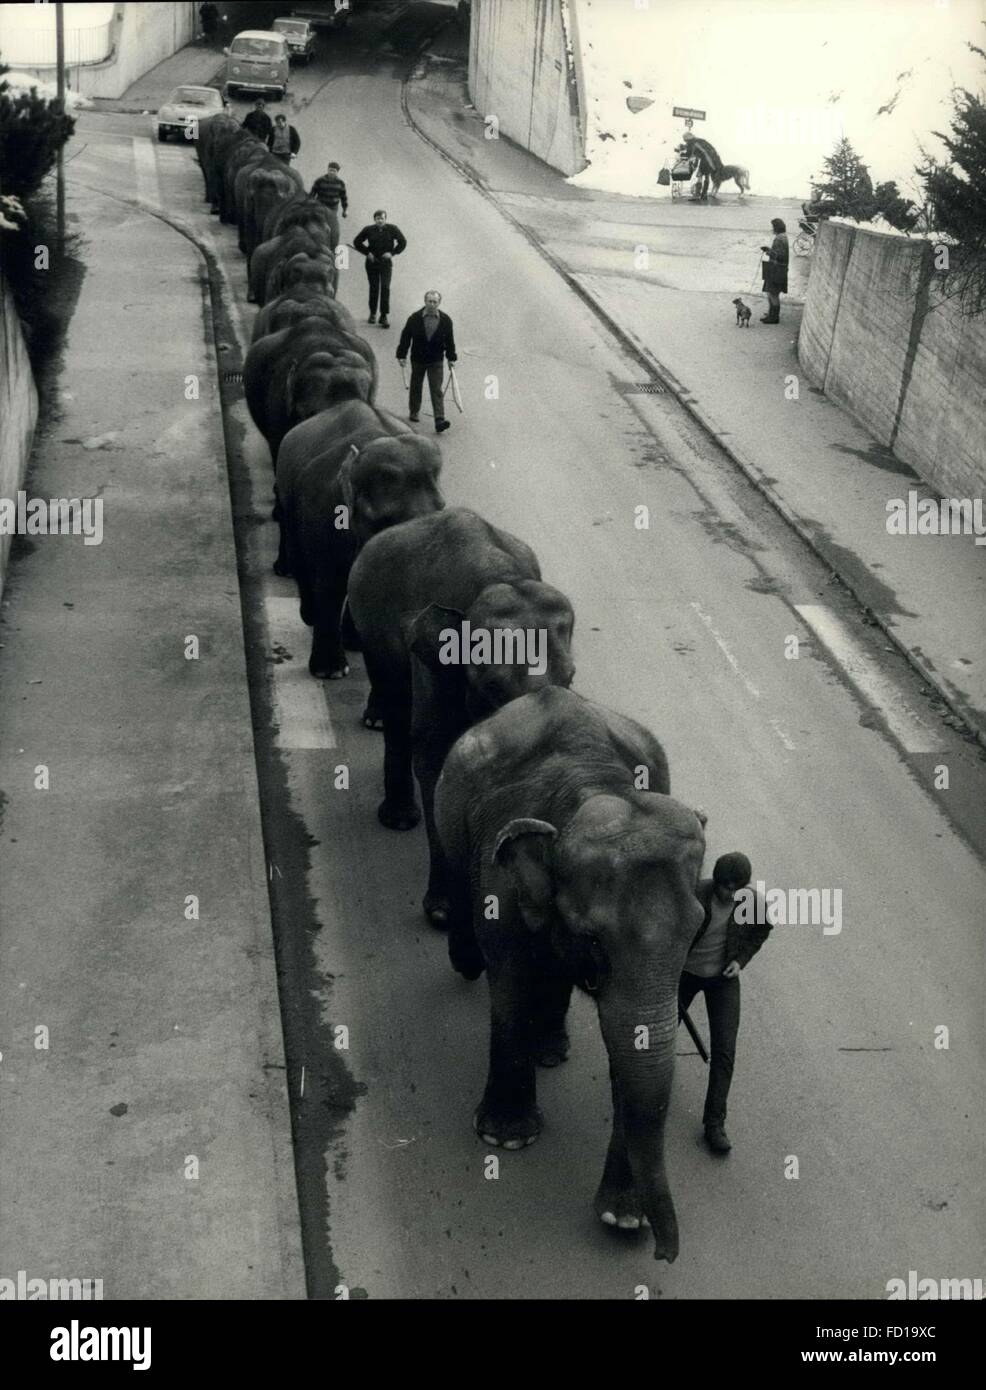 1970 - Elephant walk in the first days of spring The Swiss national circus Knie now soon will leave its winter camp in Rappesrwill. These last quiet days fortunately the first charming spring-days, the large elephant family, composed fo 14 members, goes out for a leisurely walk in the street of Rapperswill. Keystone Zurich 10-3-70 © Keystone Pictures USA/ZUMAPRESS.com/Alamy Live News Stock Photo